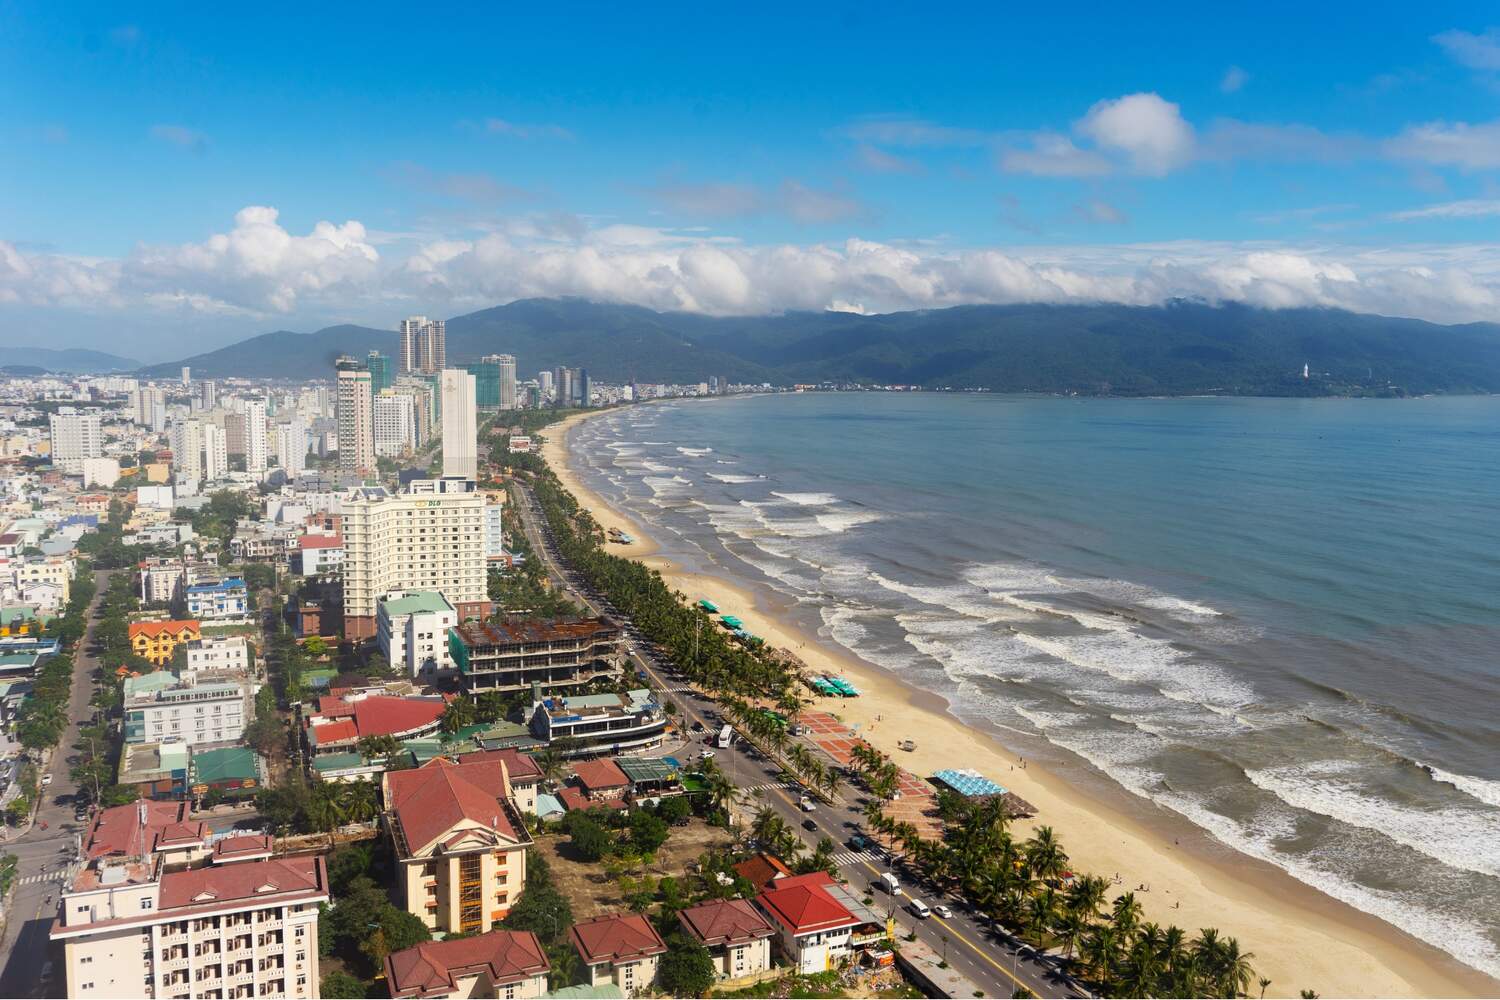 The Best 5-Day Da Nang Itinerary Travel Guide, An aerial view of a coastal city with tall buildings along a beachfront, waves approaching the shore, and a mountain range in the background.